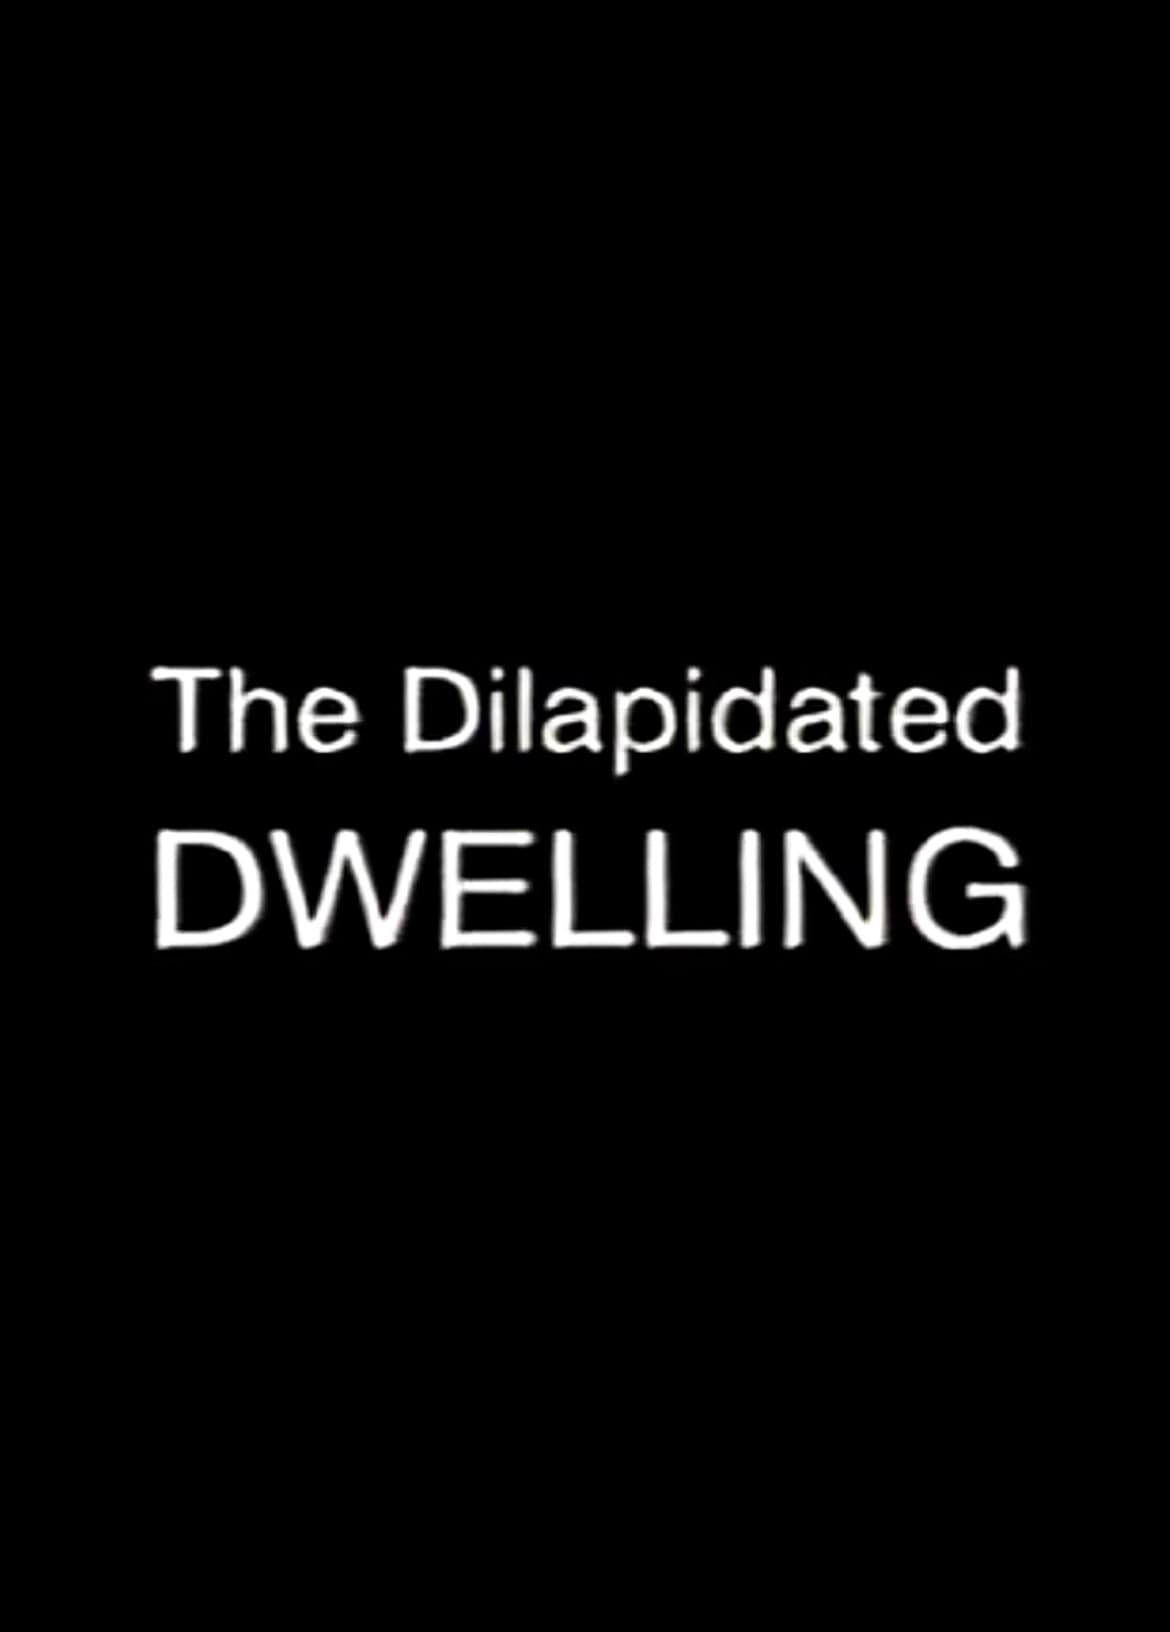 The Dilapidated Dwelling (2000)